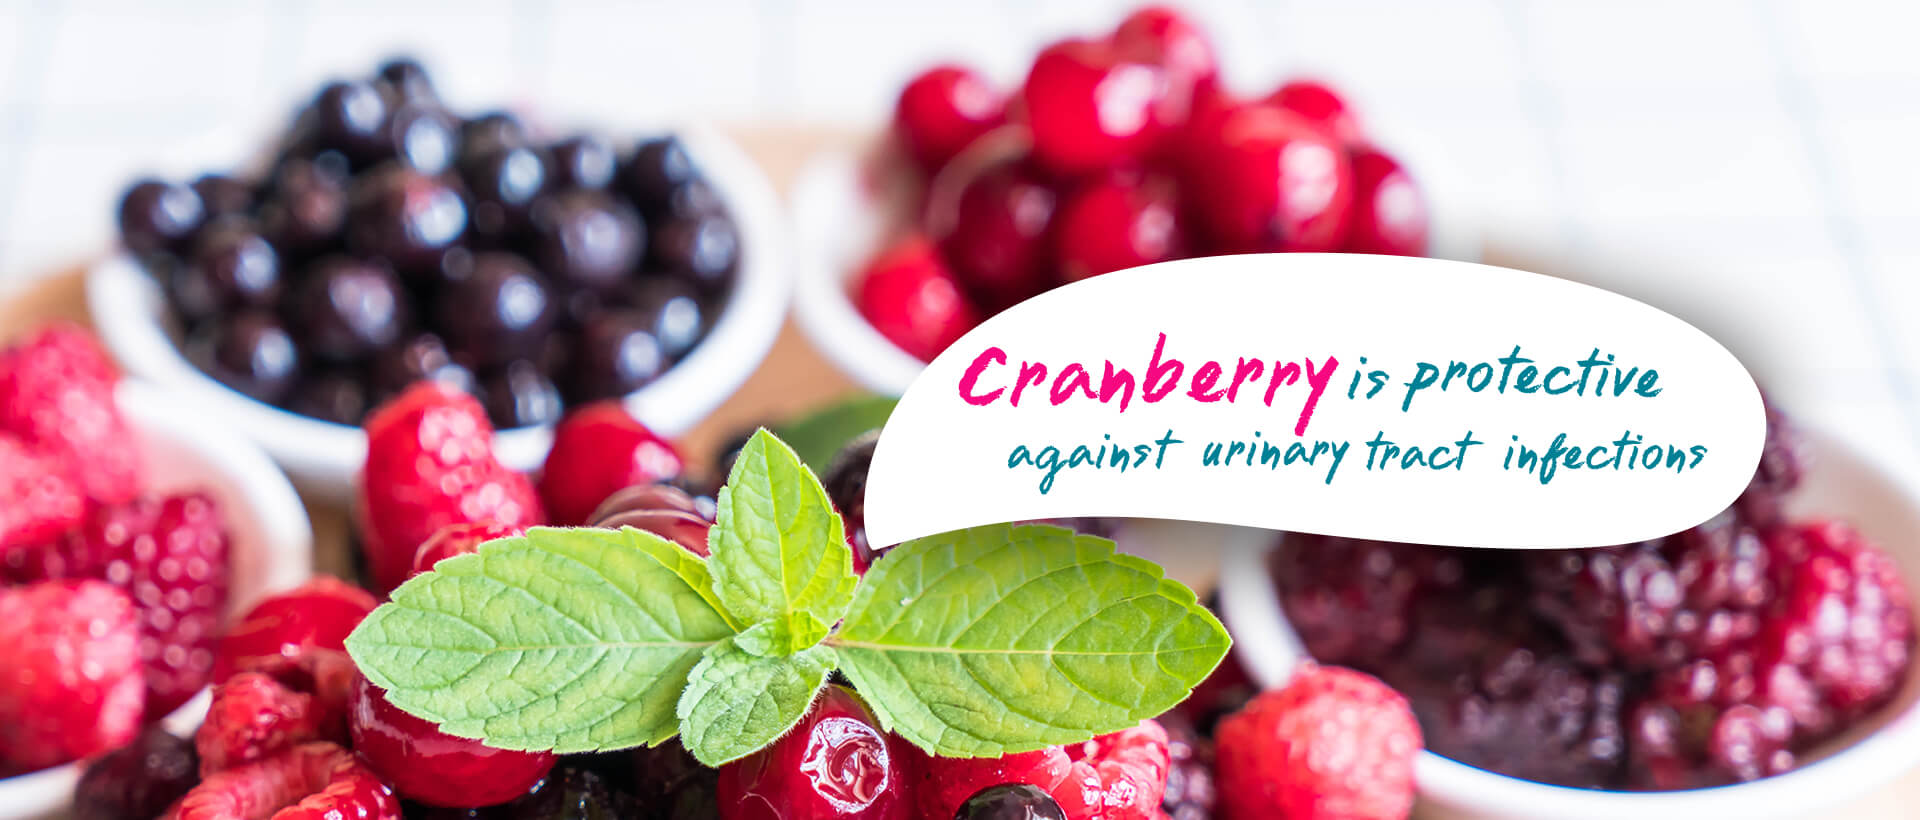 Cranberry is protective against urinary tract infections